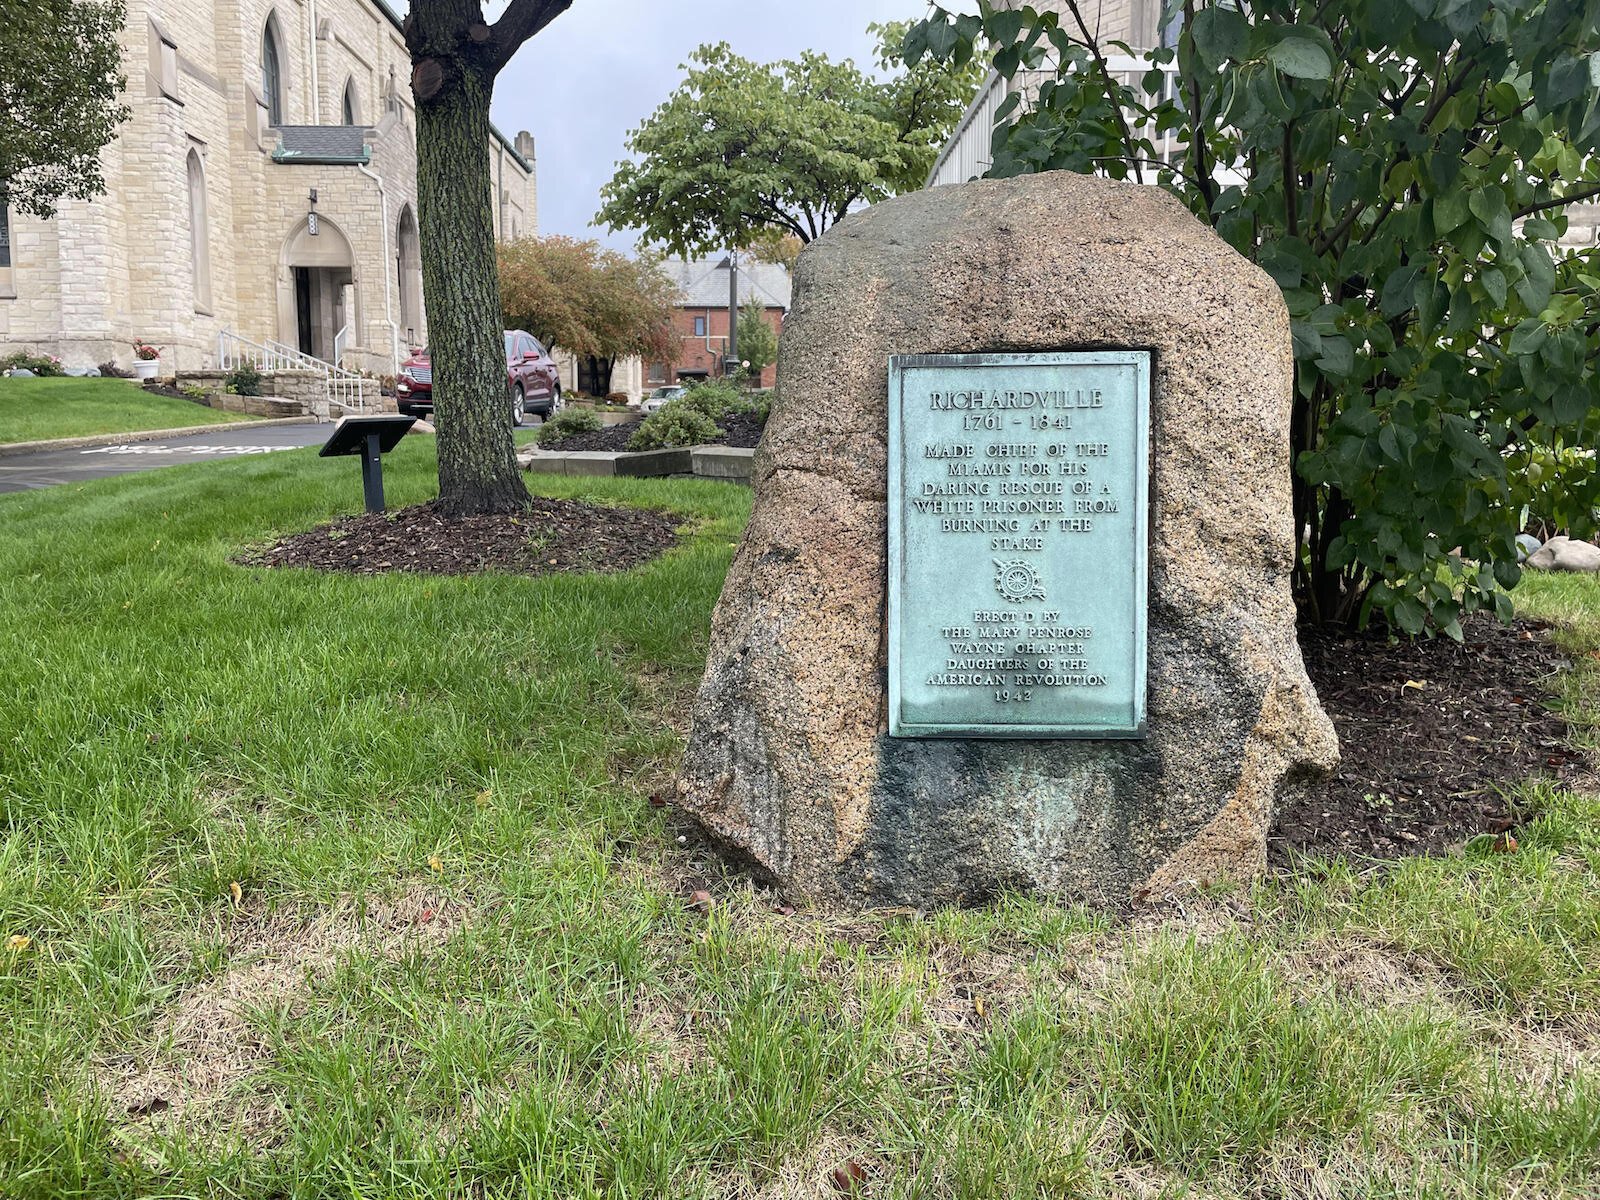 A historical marker laid by the Daughters of the American Revolution marks the spot near where Chief Richardville was originally buried at the Cathedral of the Immaculate Conception downtown.